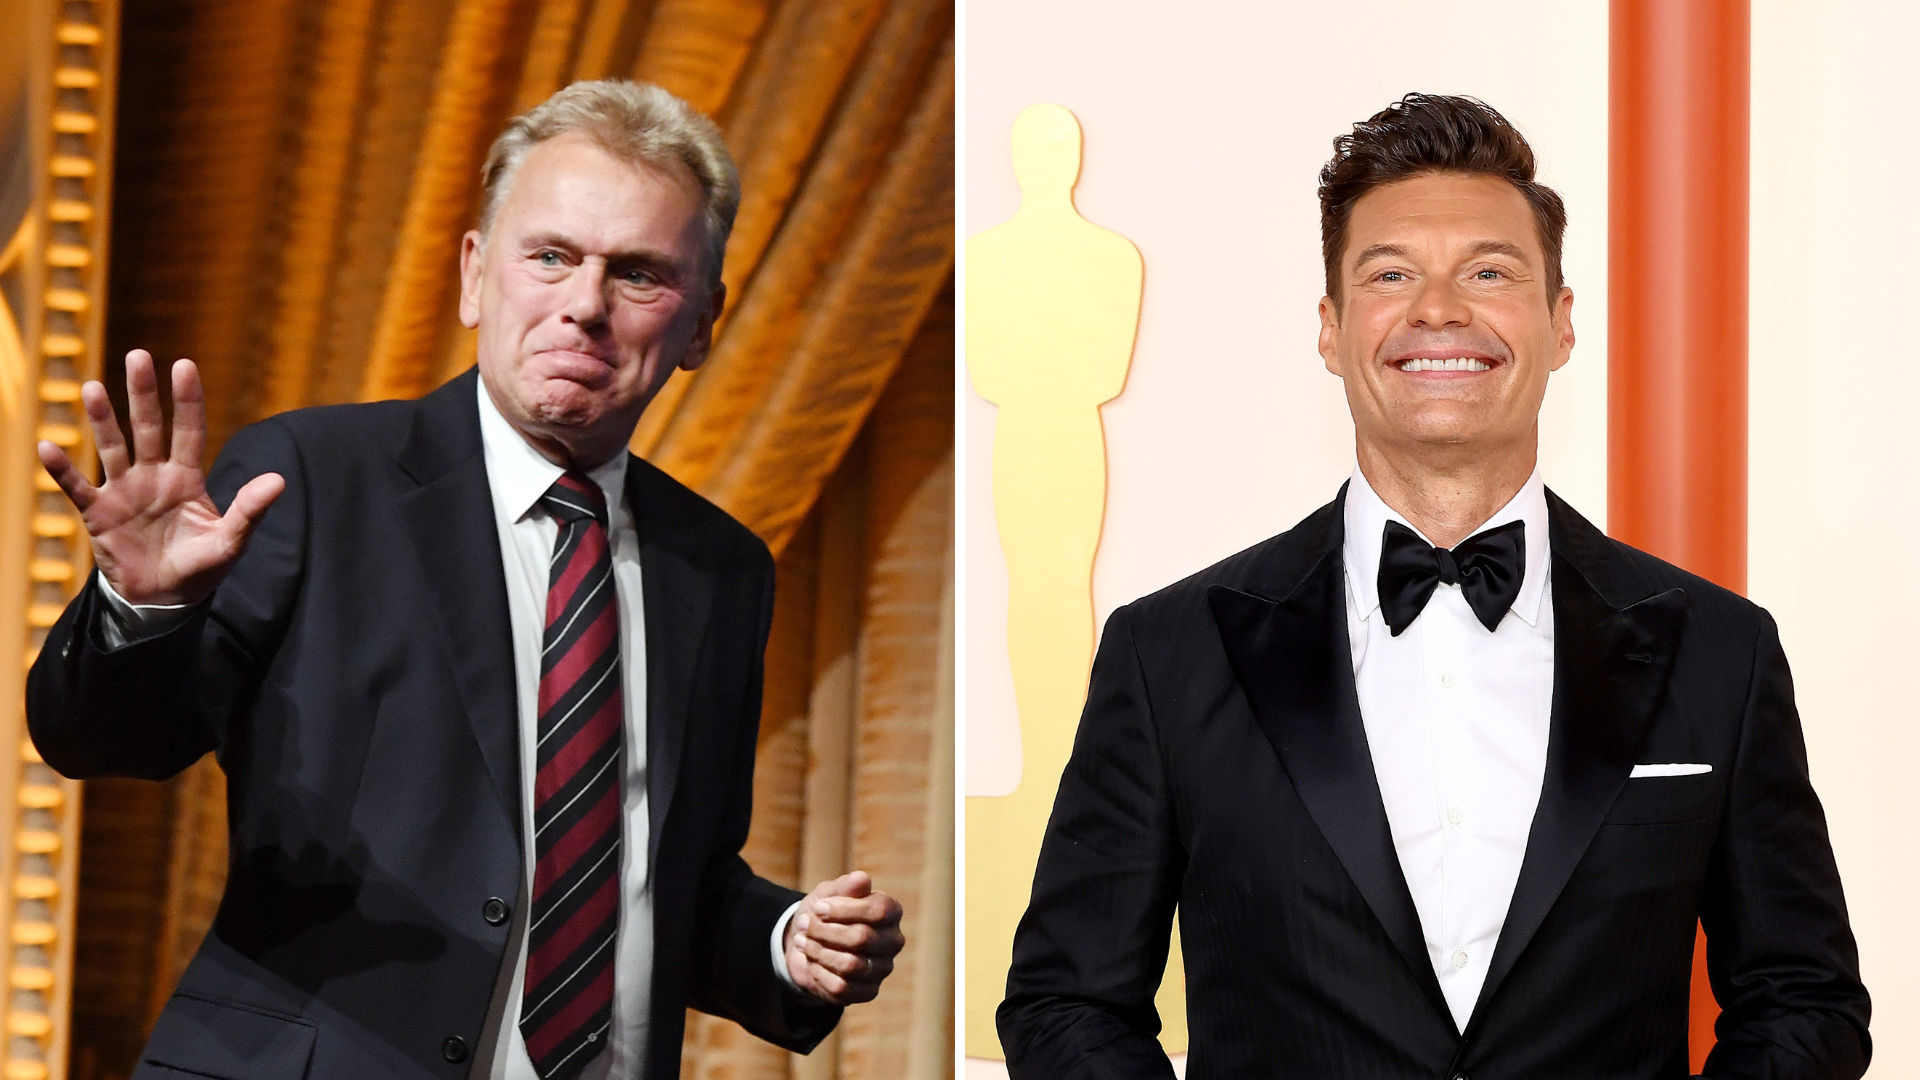 The category? "Proper Name." The answer? Ryan Seacrest, who will become the new "Wheel of Fortune" ...